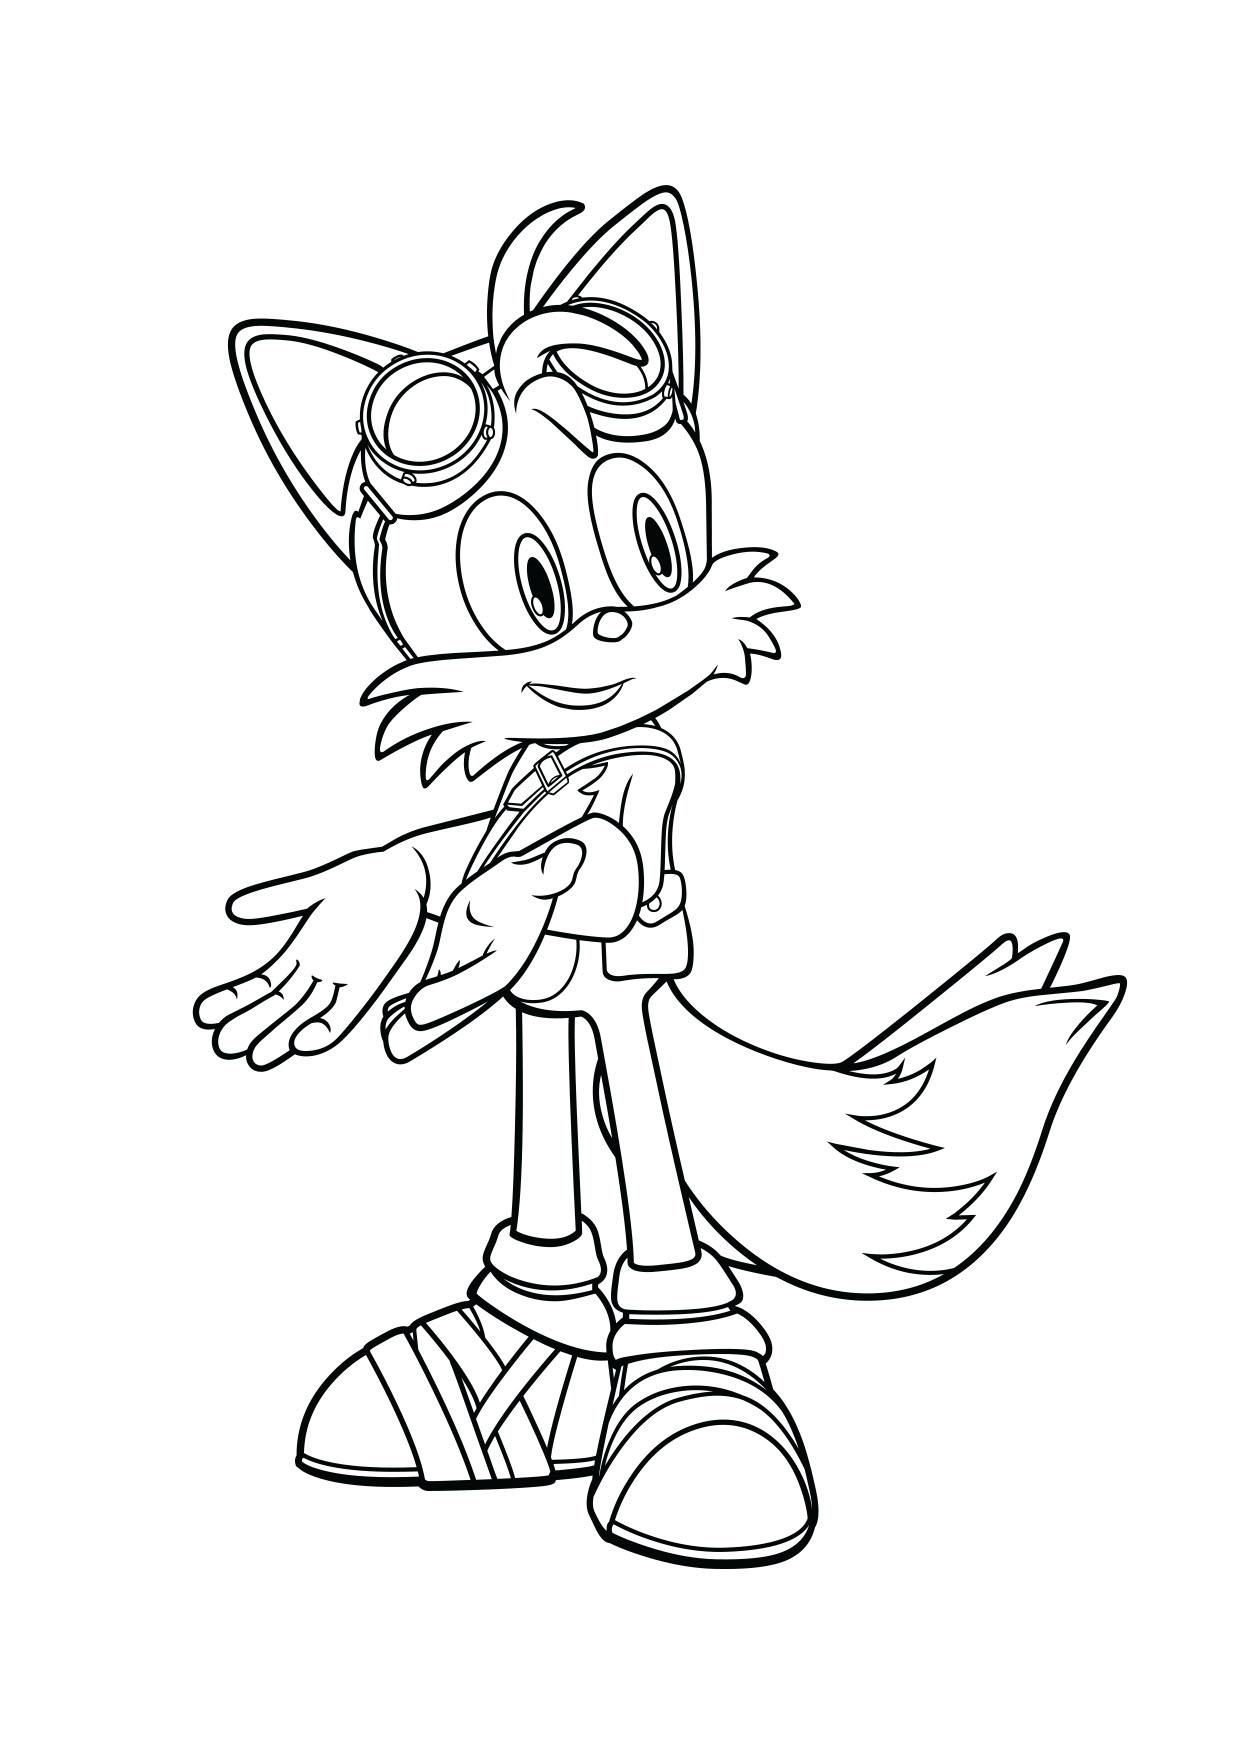 Free Printable Tails The Fox Coloring Pages Pdf - Tails The Fox Coloring Pages